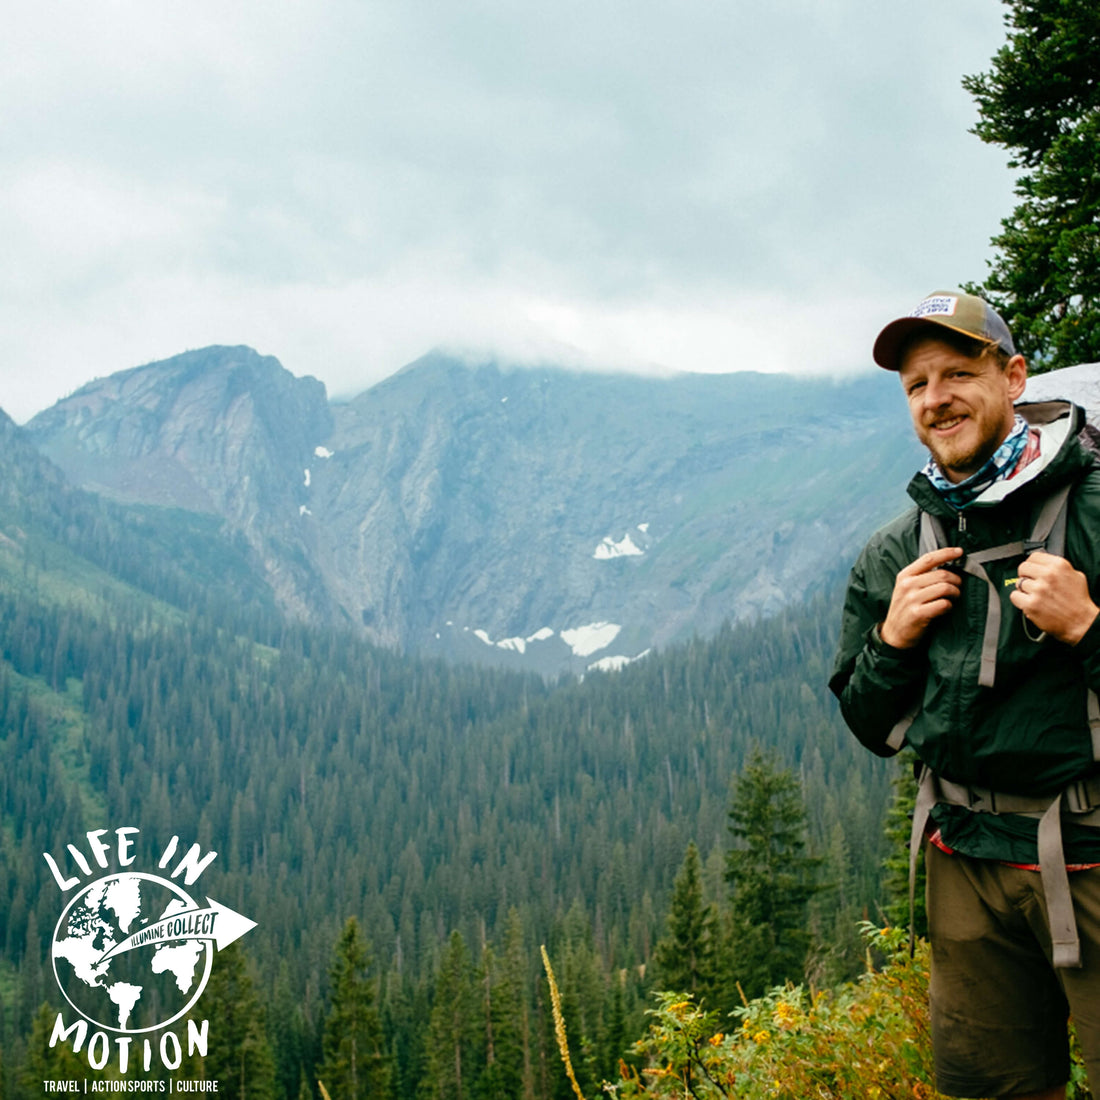 An Invitation To The Outdoors - Why the outdoors belong to everyone with Benjamin Morris of Outdoor Recreation Alliance Trails